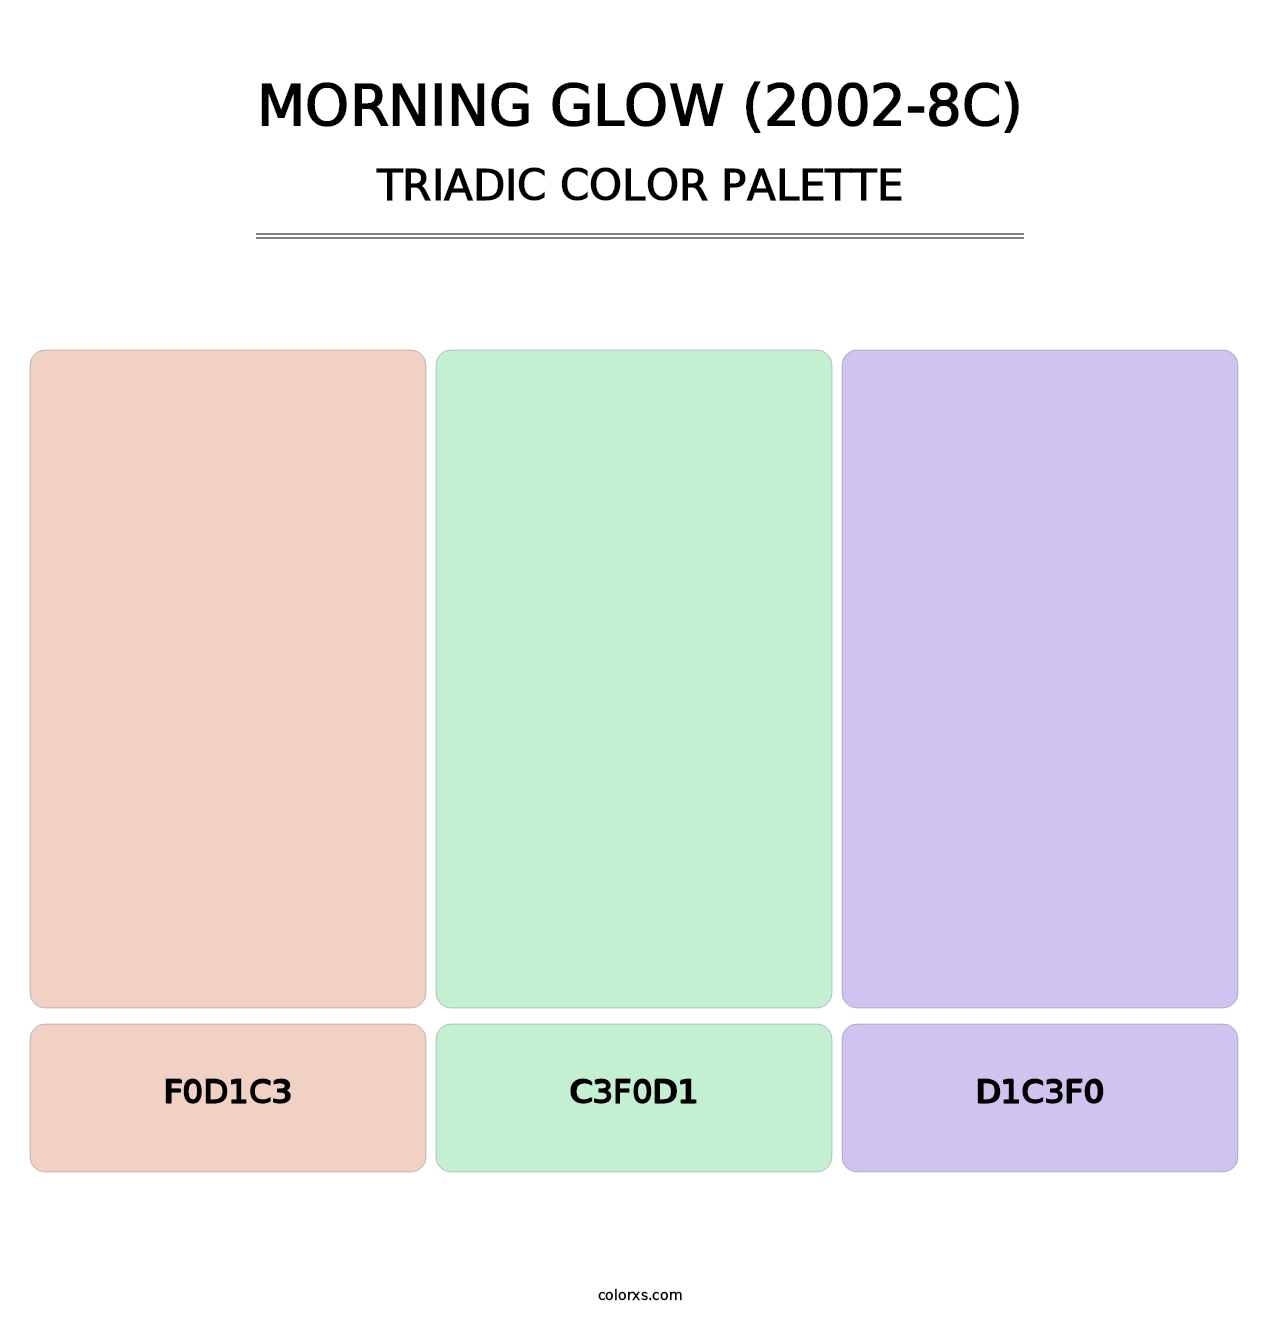 Morning Glow (2002-8C) - Triadic Color Palette